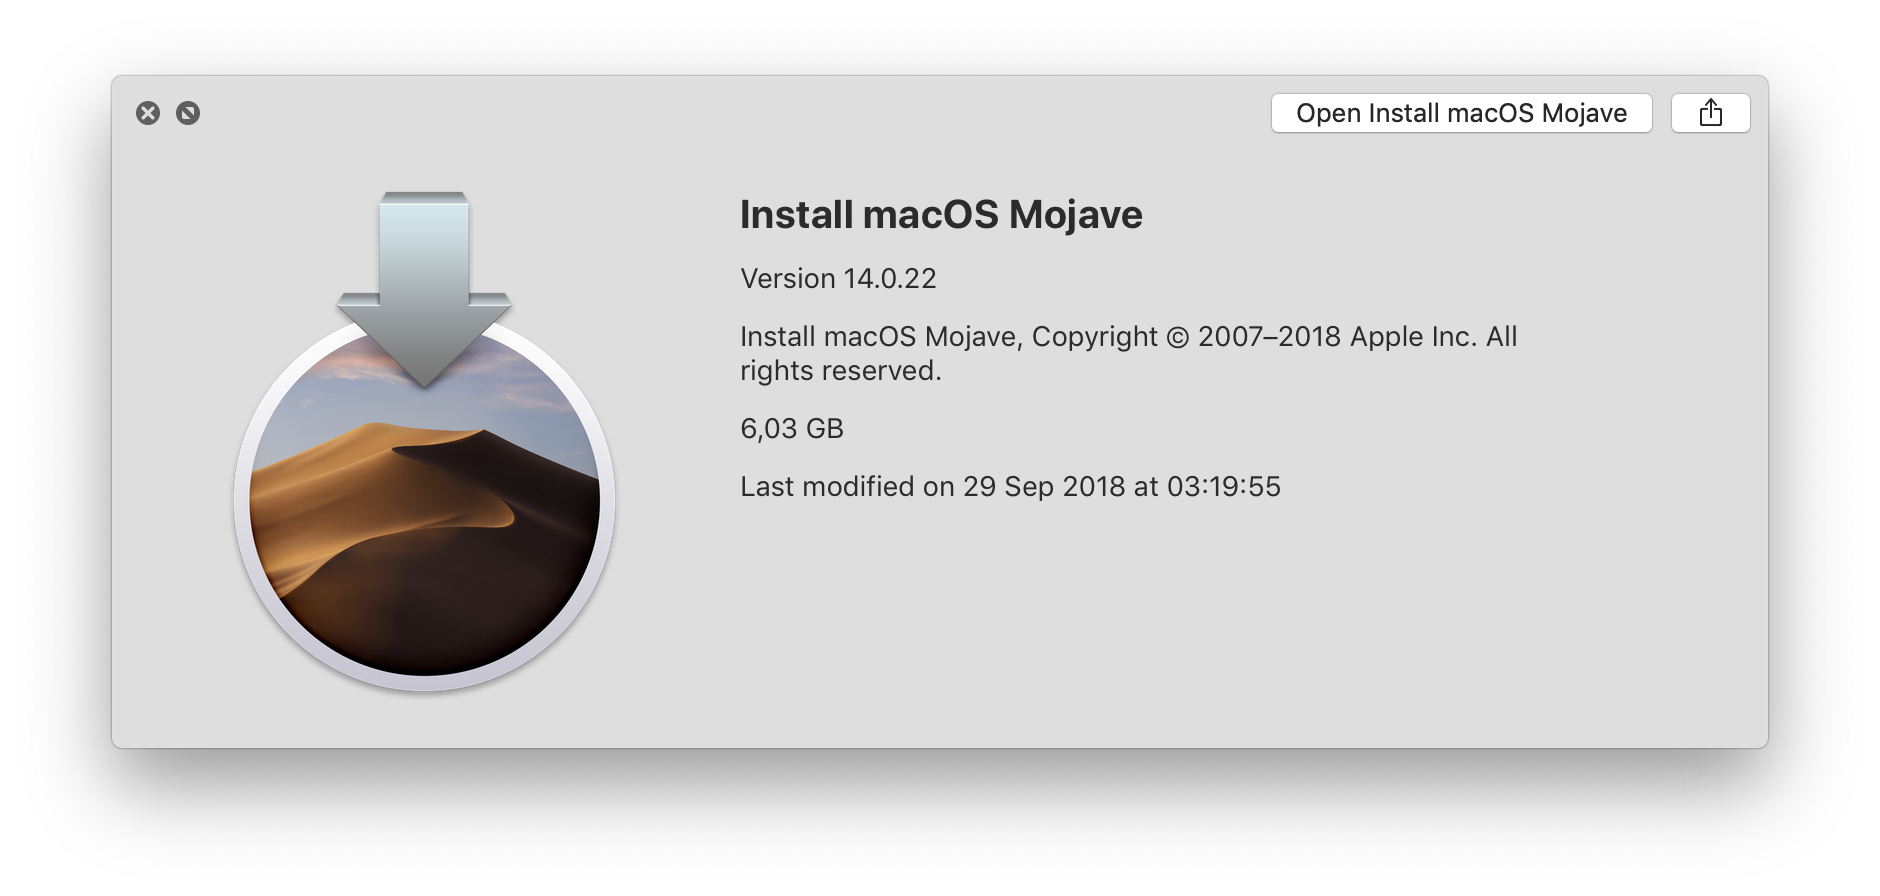 macos catalina patcher tool for unsupported macs